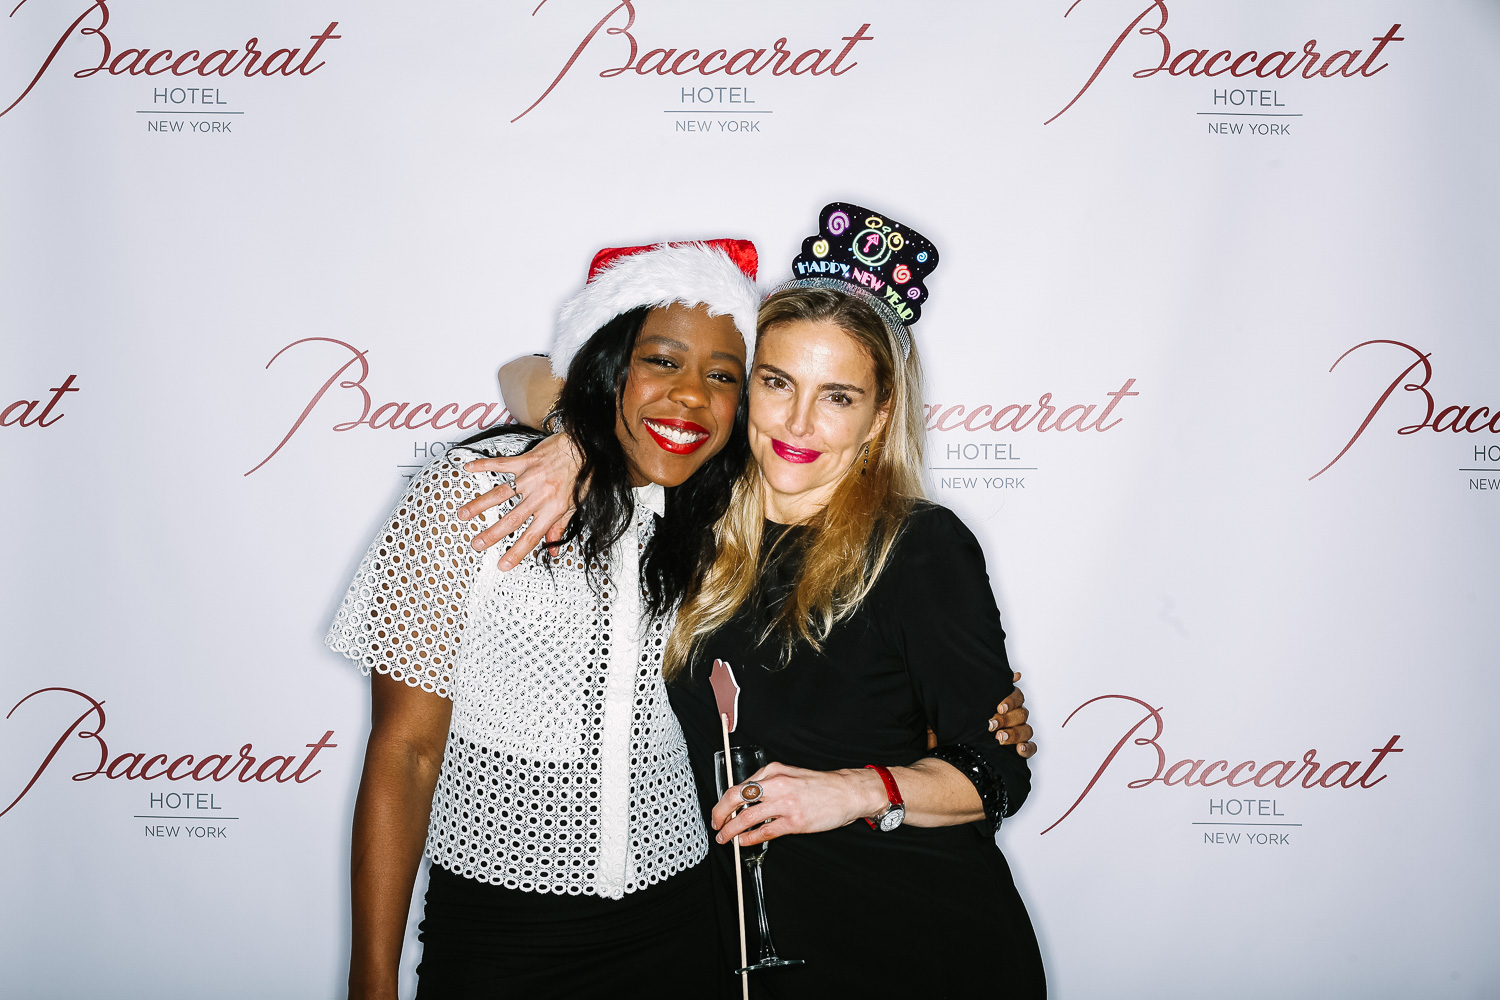 Baccarat Hotel Holiday Party